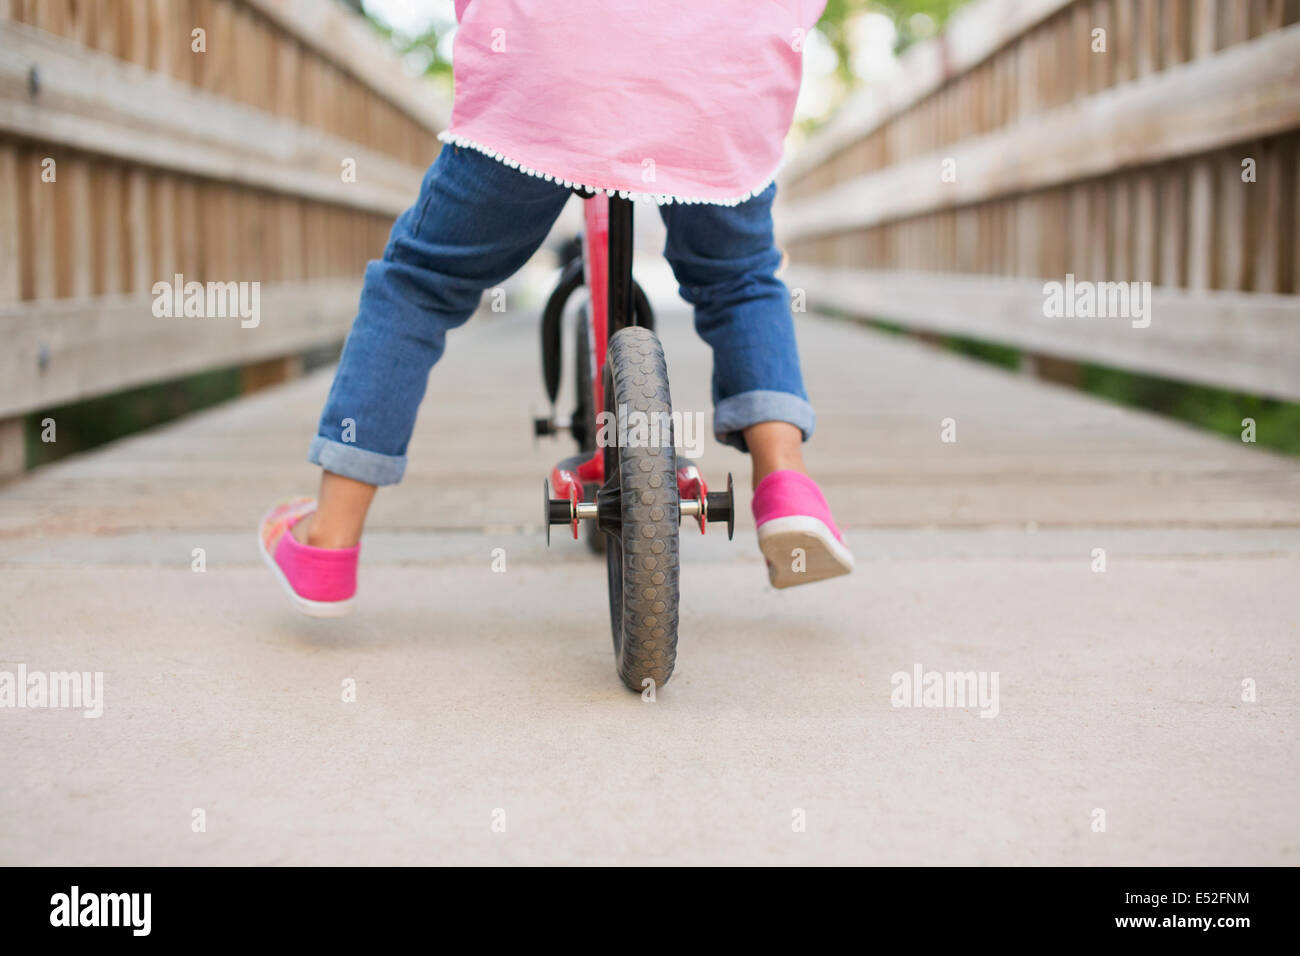 A child riding on a bicycle on a boardwalk. Stock Photo